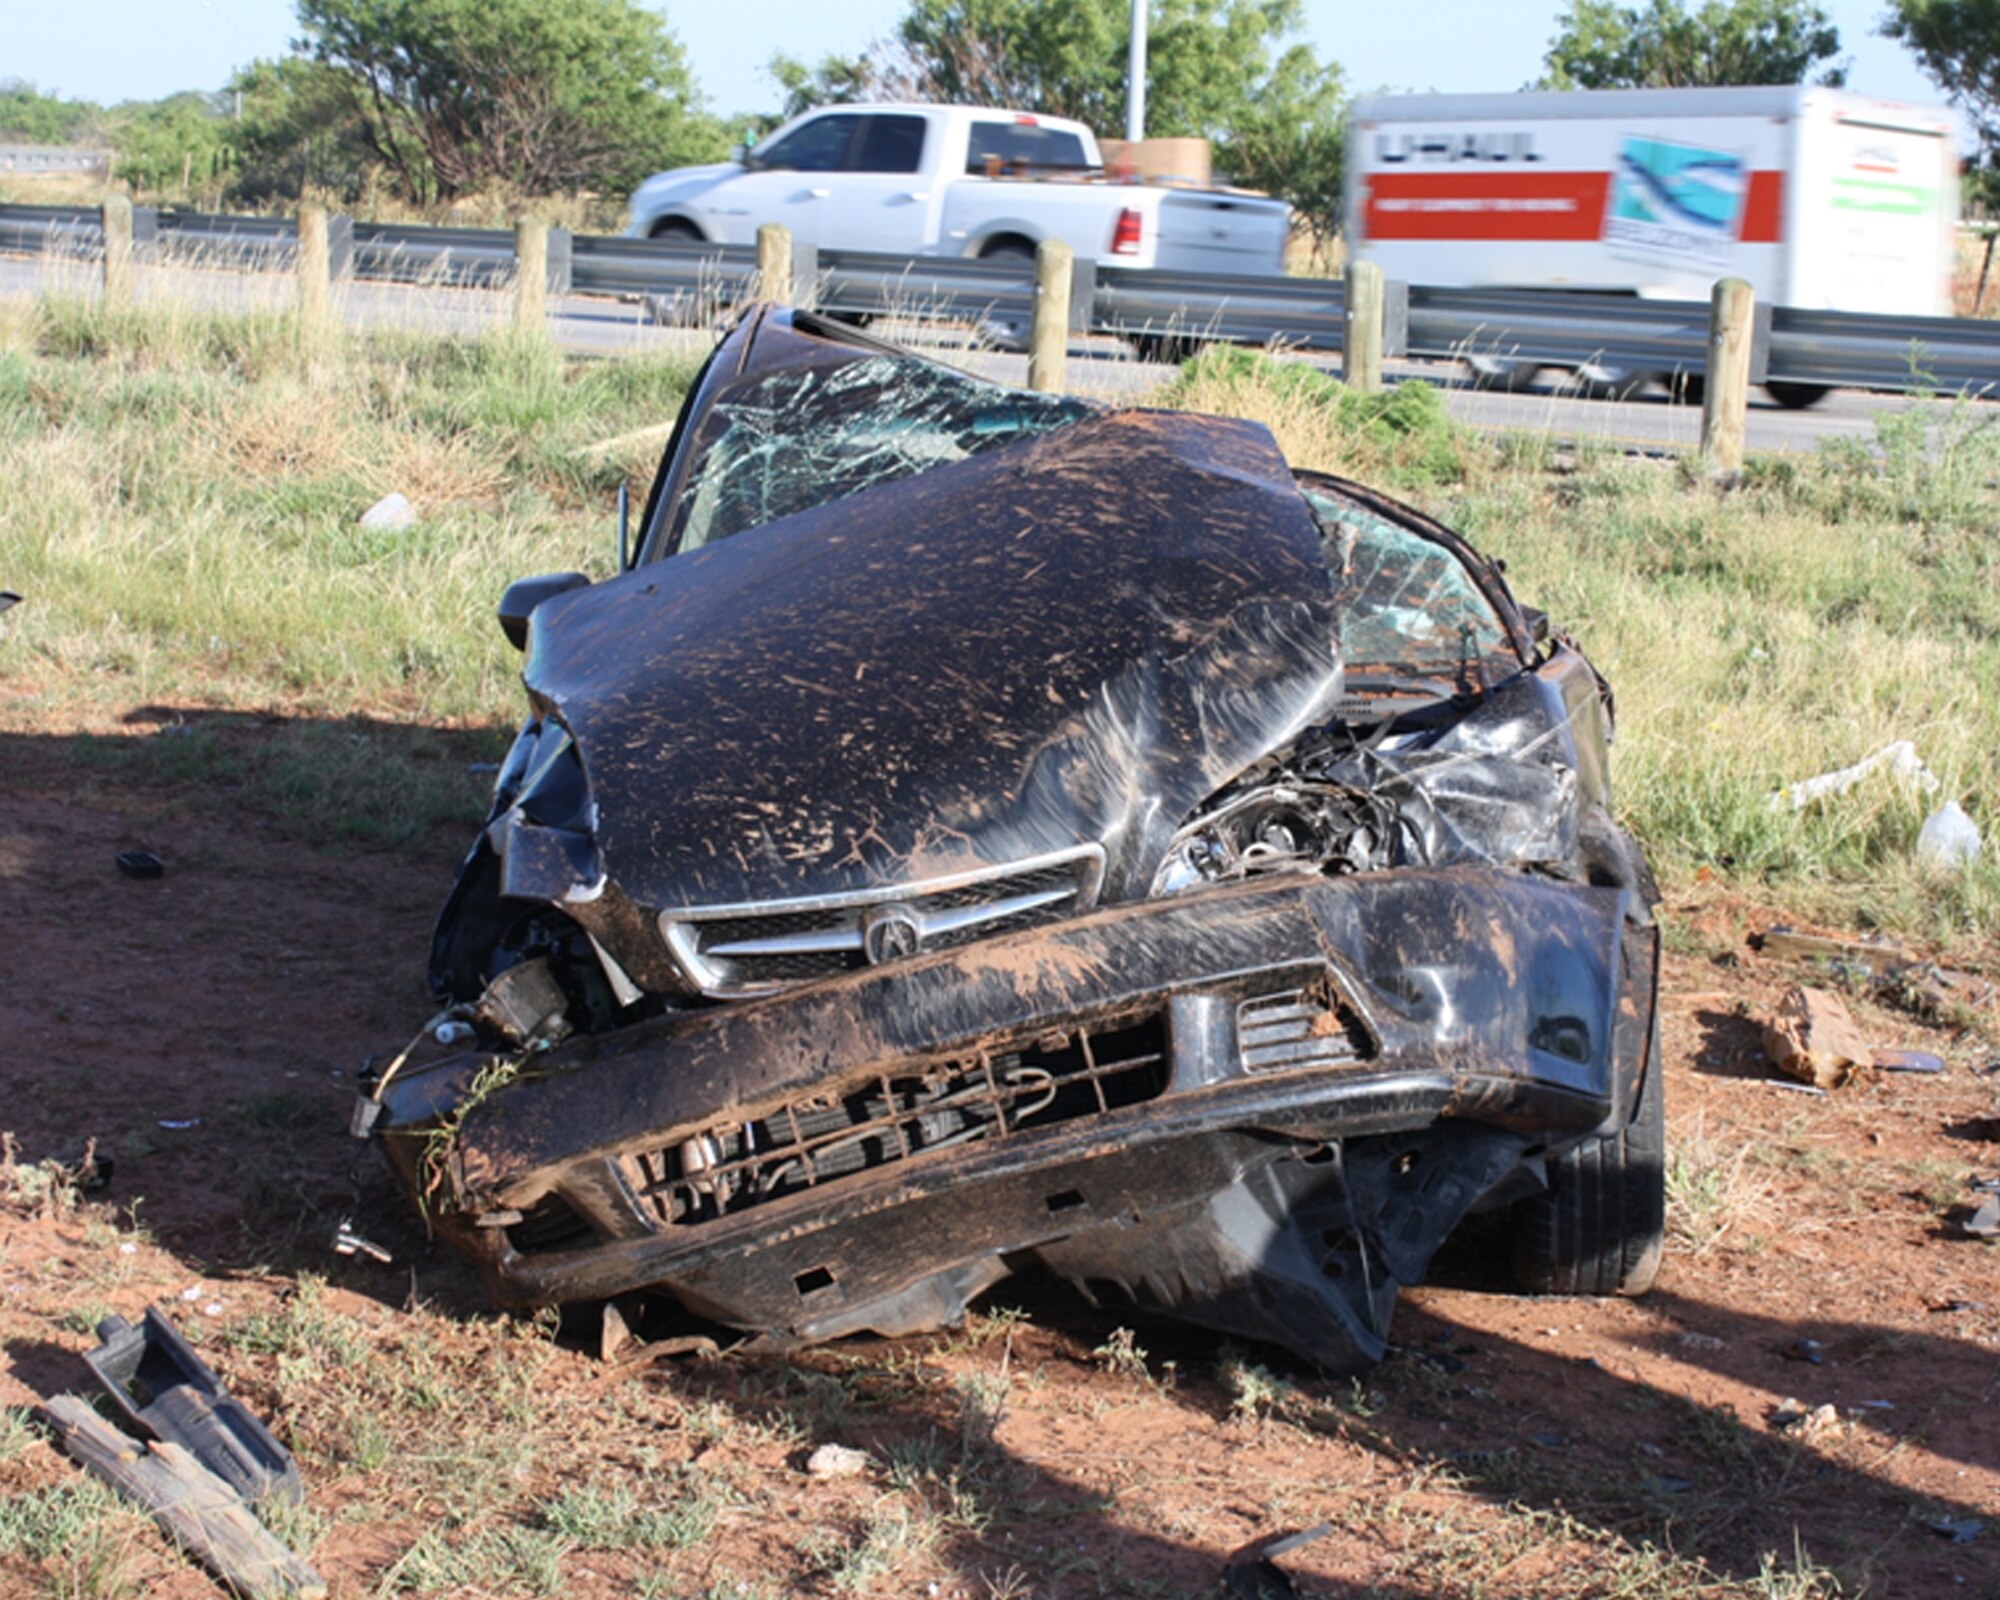 Senior Airman Daniel Mejia, 9th Bomb Squadron intelligence analyst, was one of the first to respond to a vehicle accident June 11, 2013, in Abilene, Texas. The driver hit a guardrail rolling the vehicle off to the side of the road. Mejia was on his way to work when he saw the car and provided self aid buddy care until an ambulance arrived. (Courtesy photo)